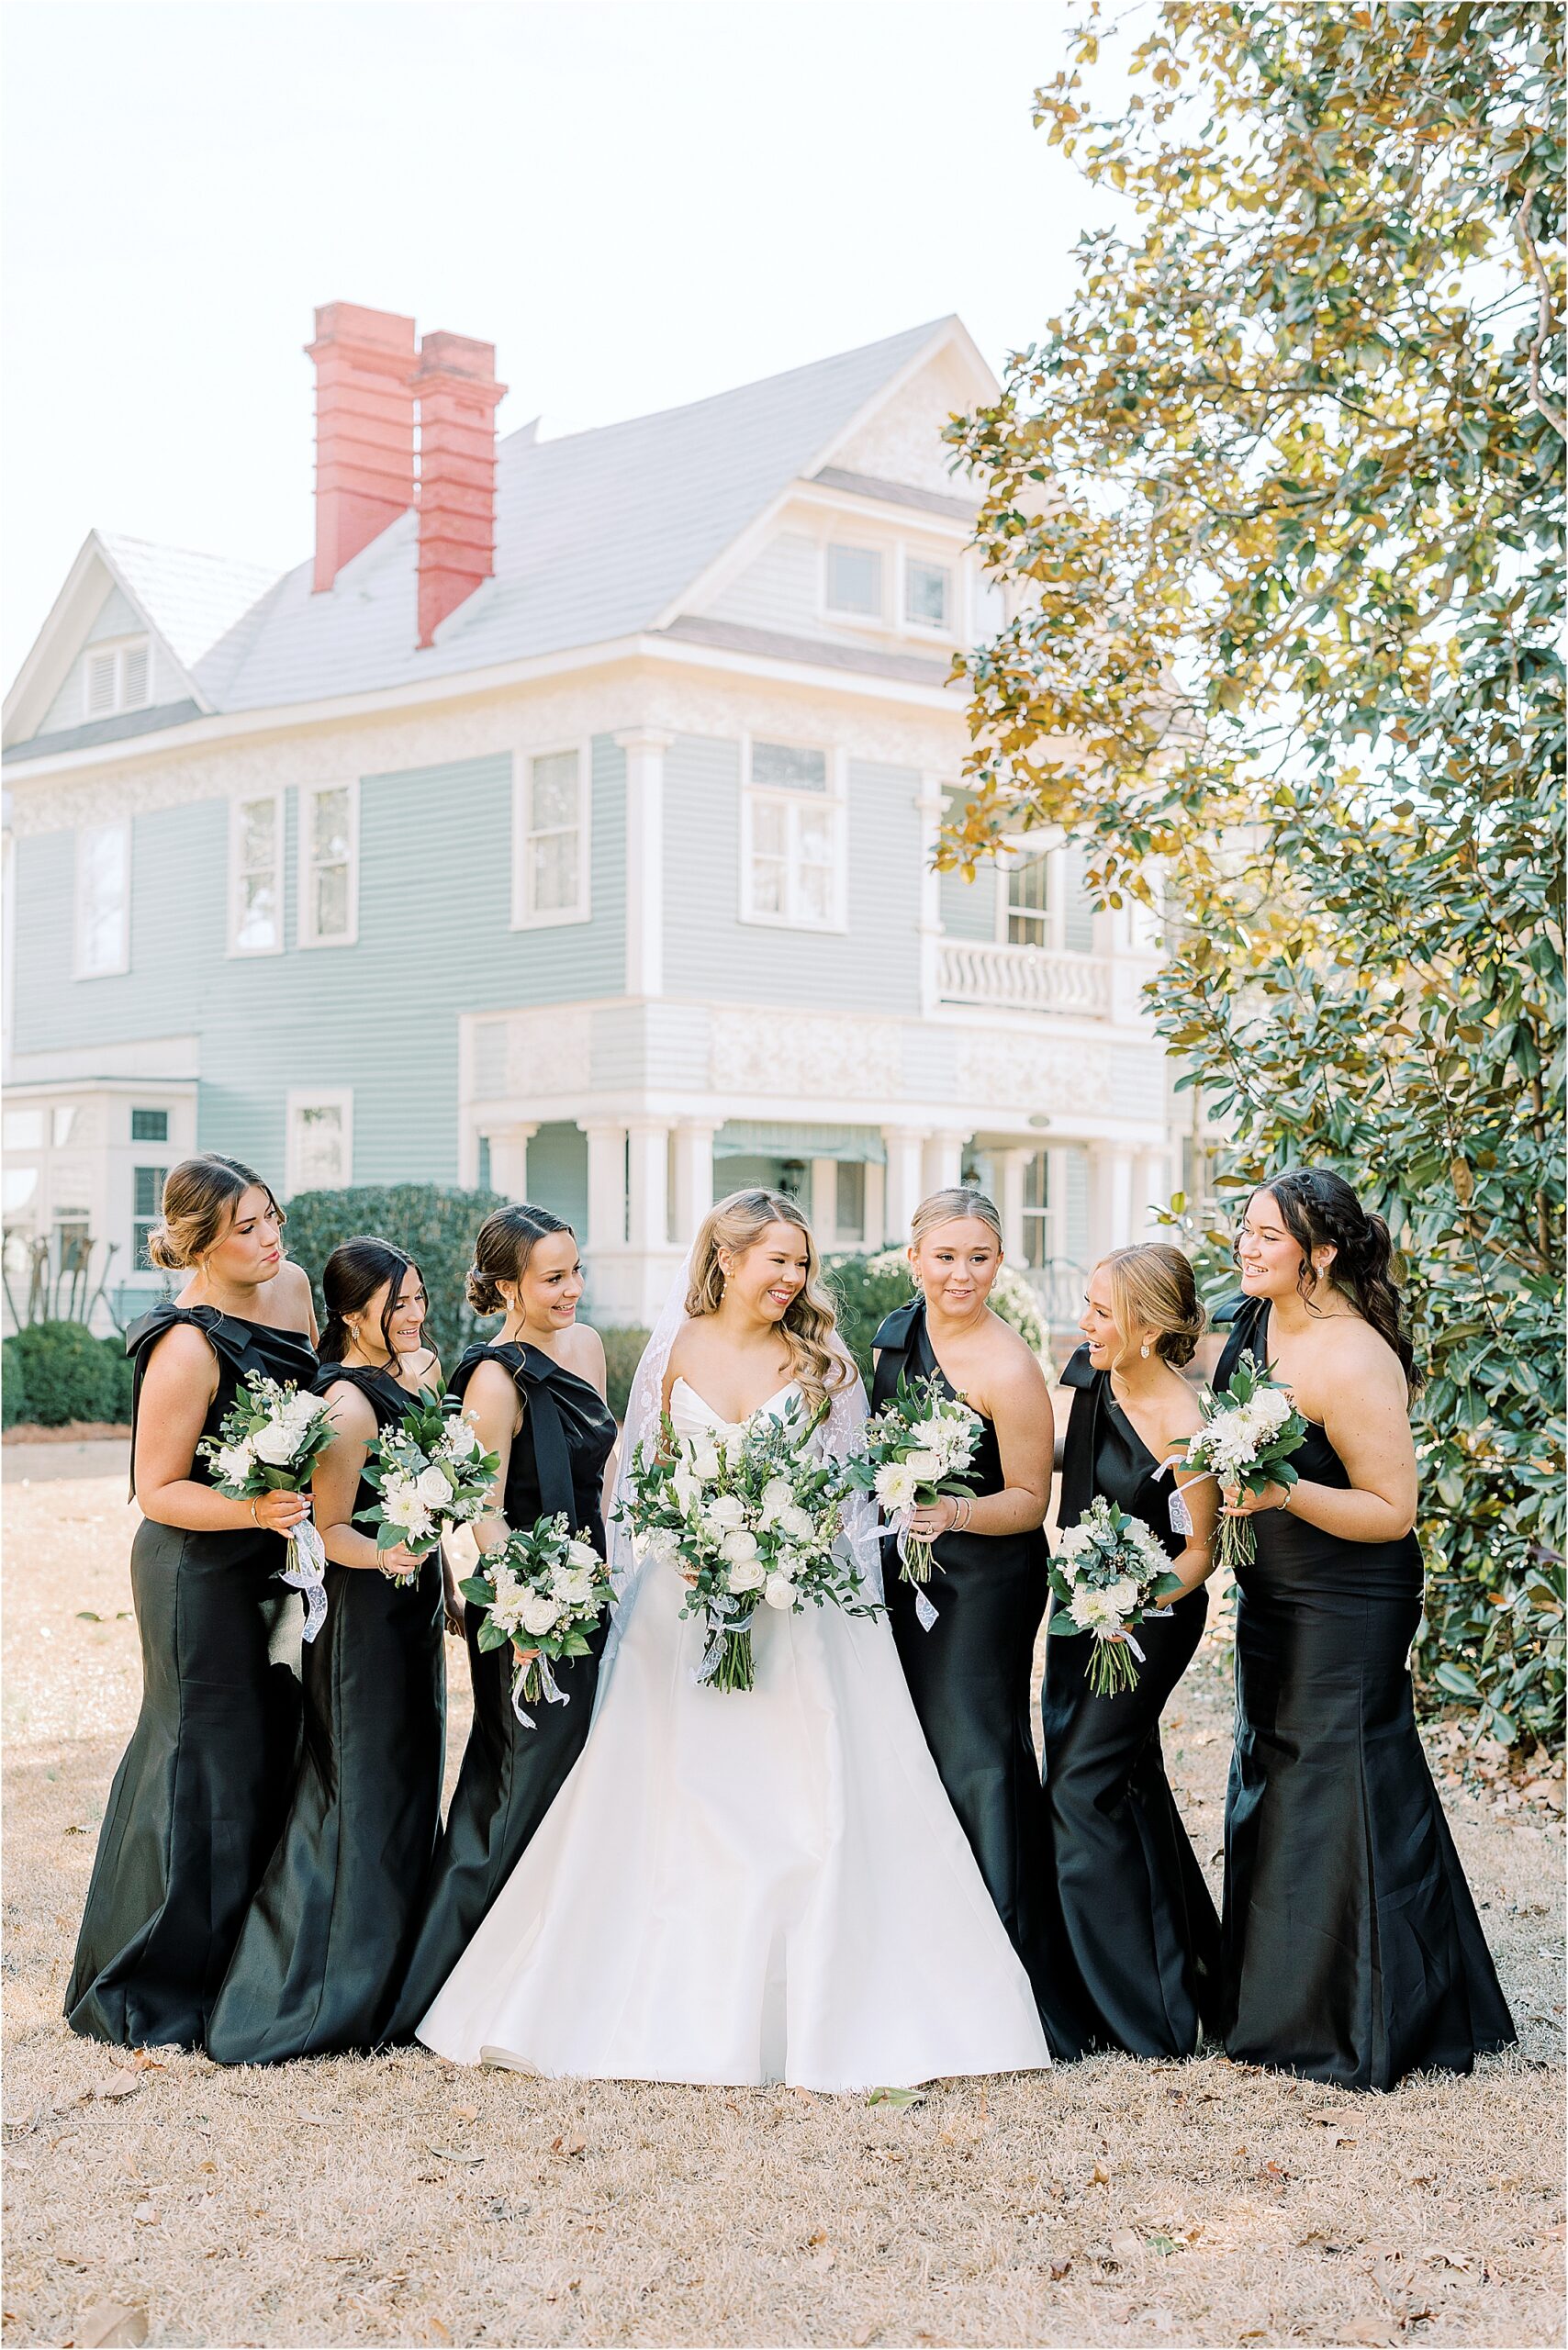 Bride in a white dress, bridesmaids in black dresses holding flowers and looking at one another